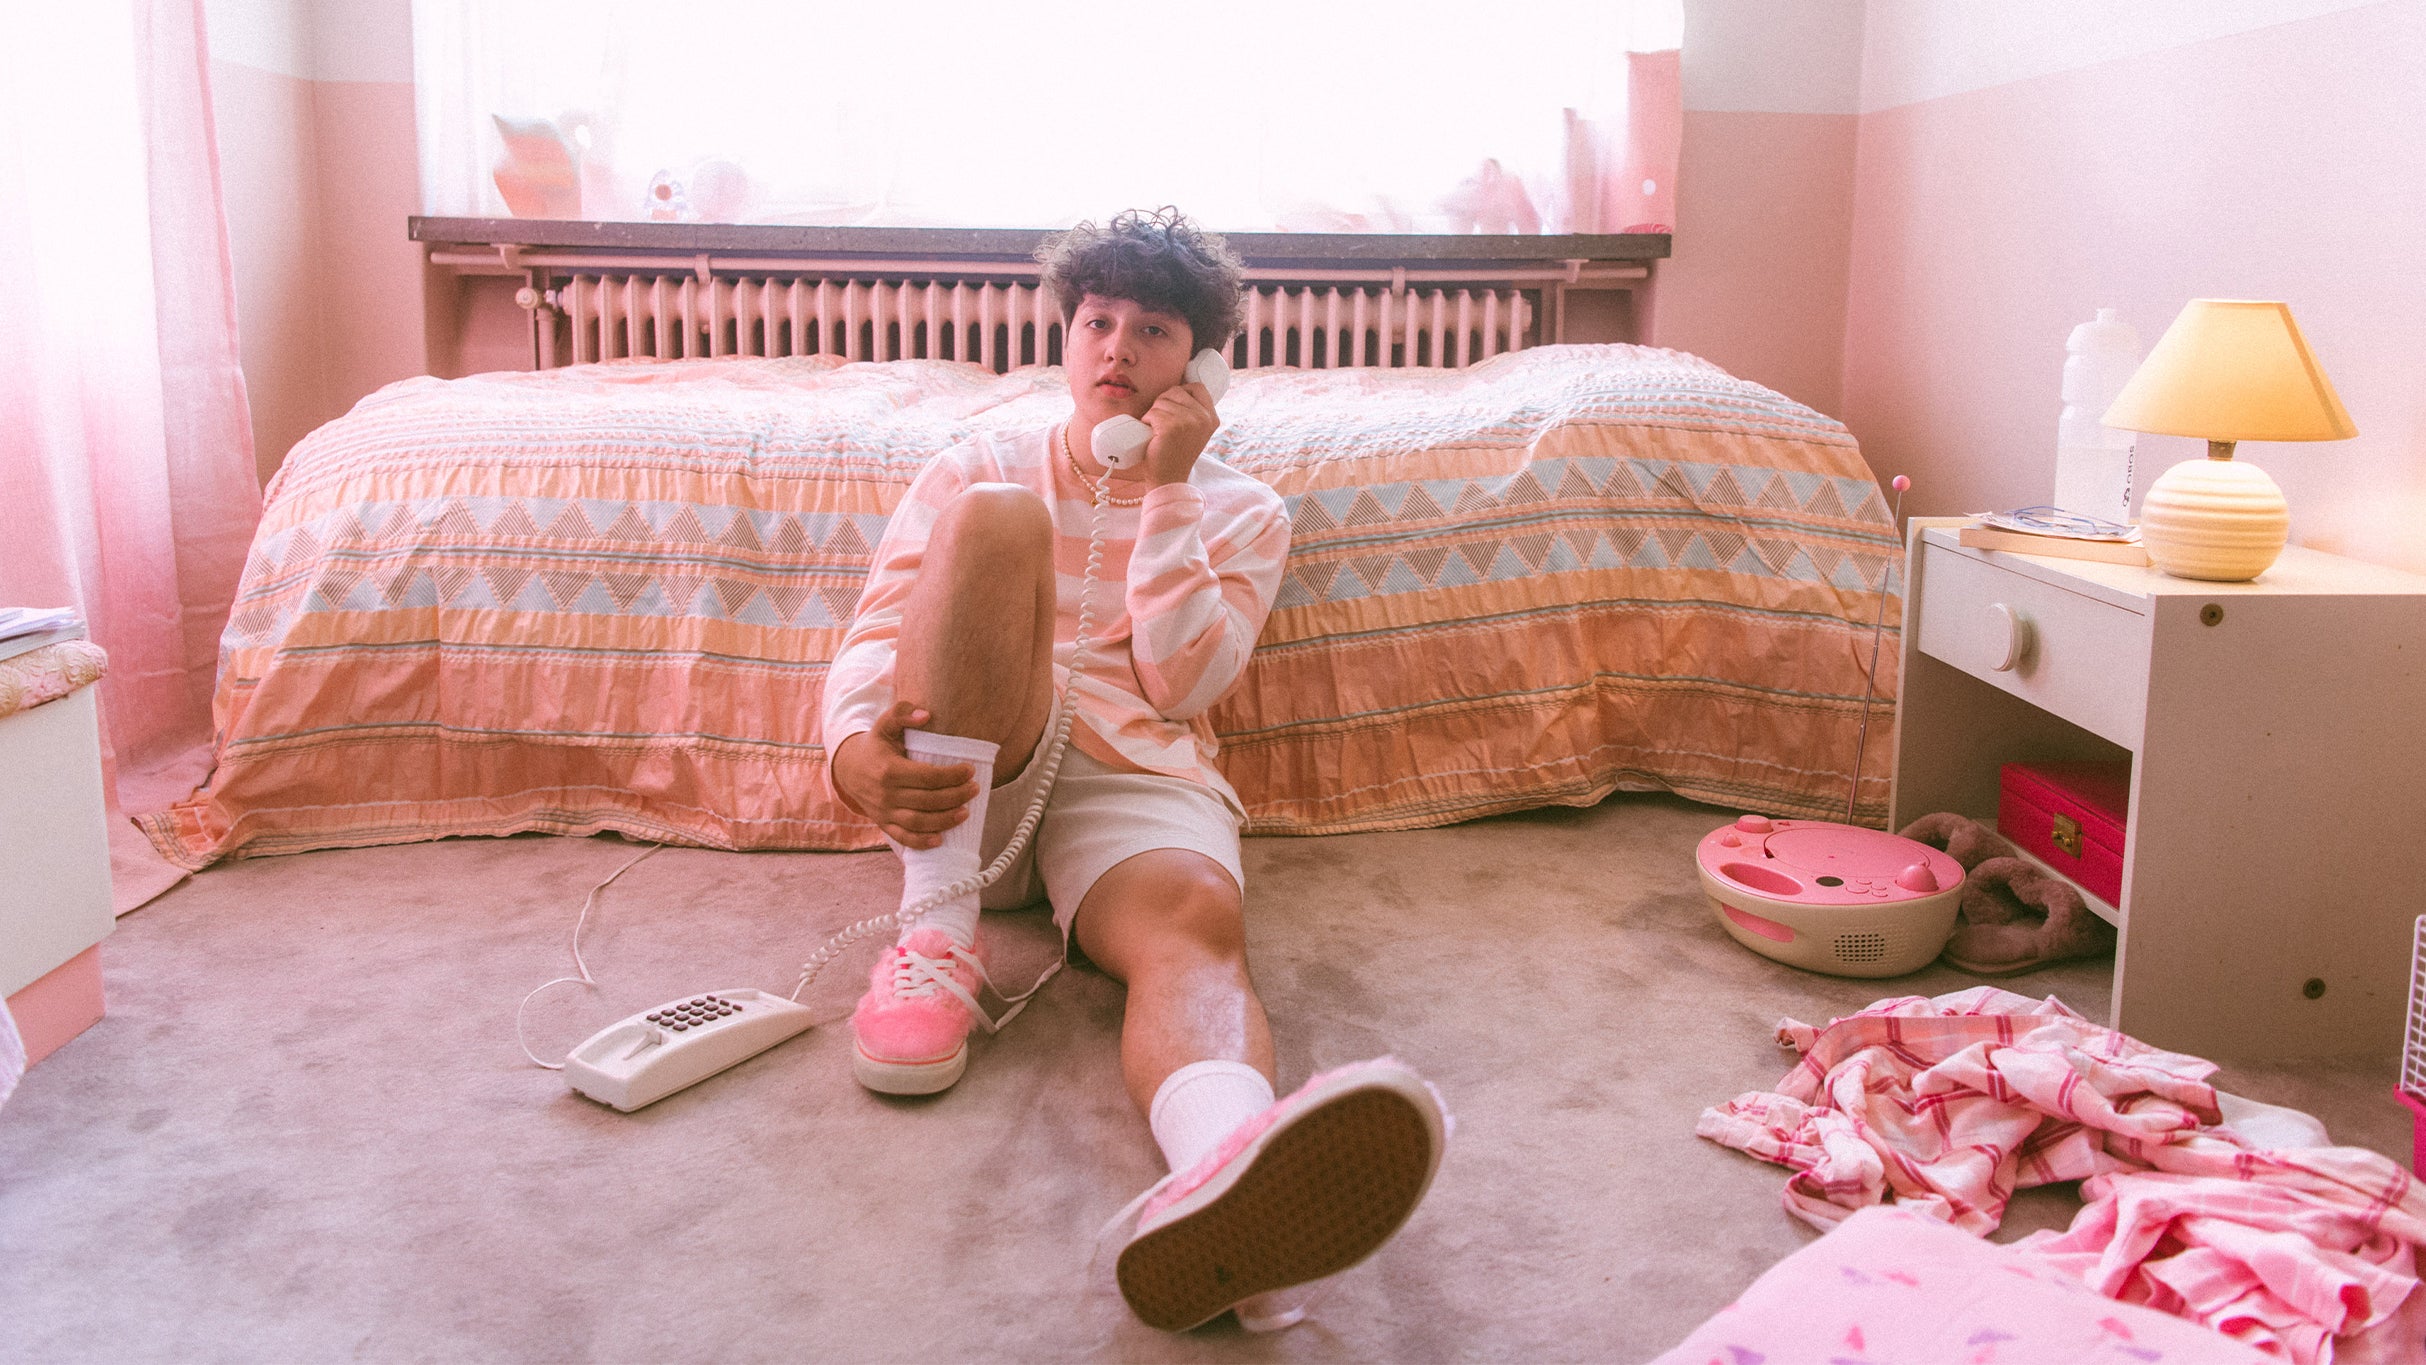 Boy Pablo presented by WLUW at The Salt Shed